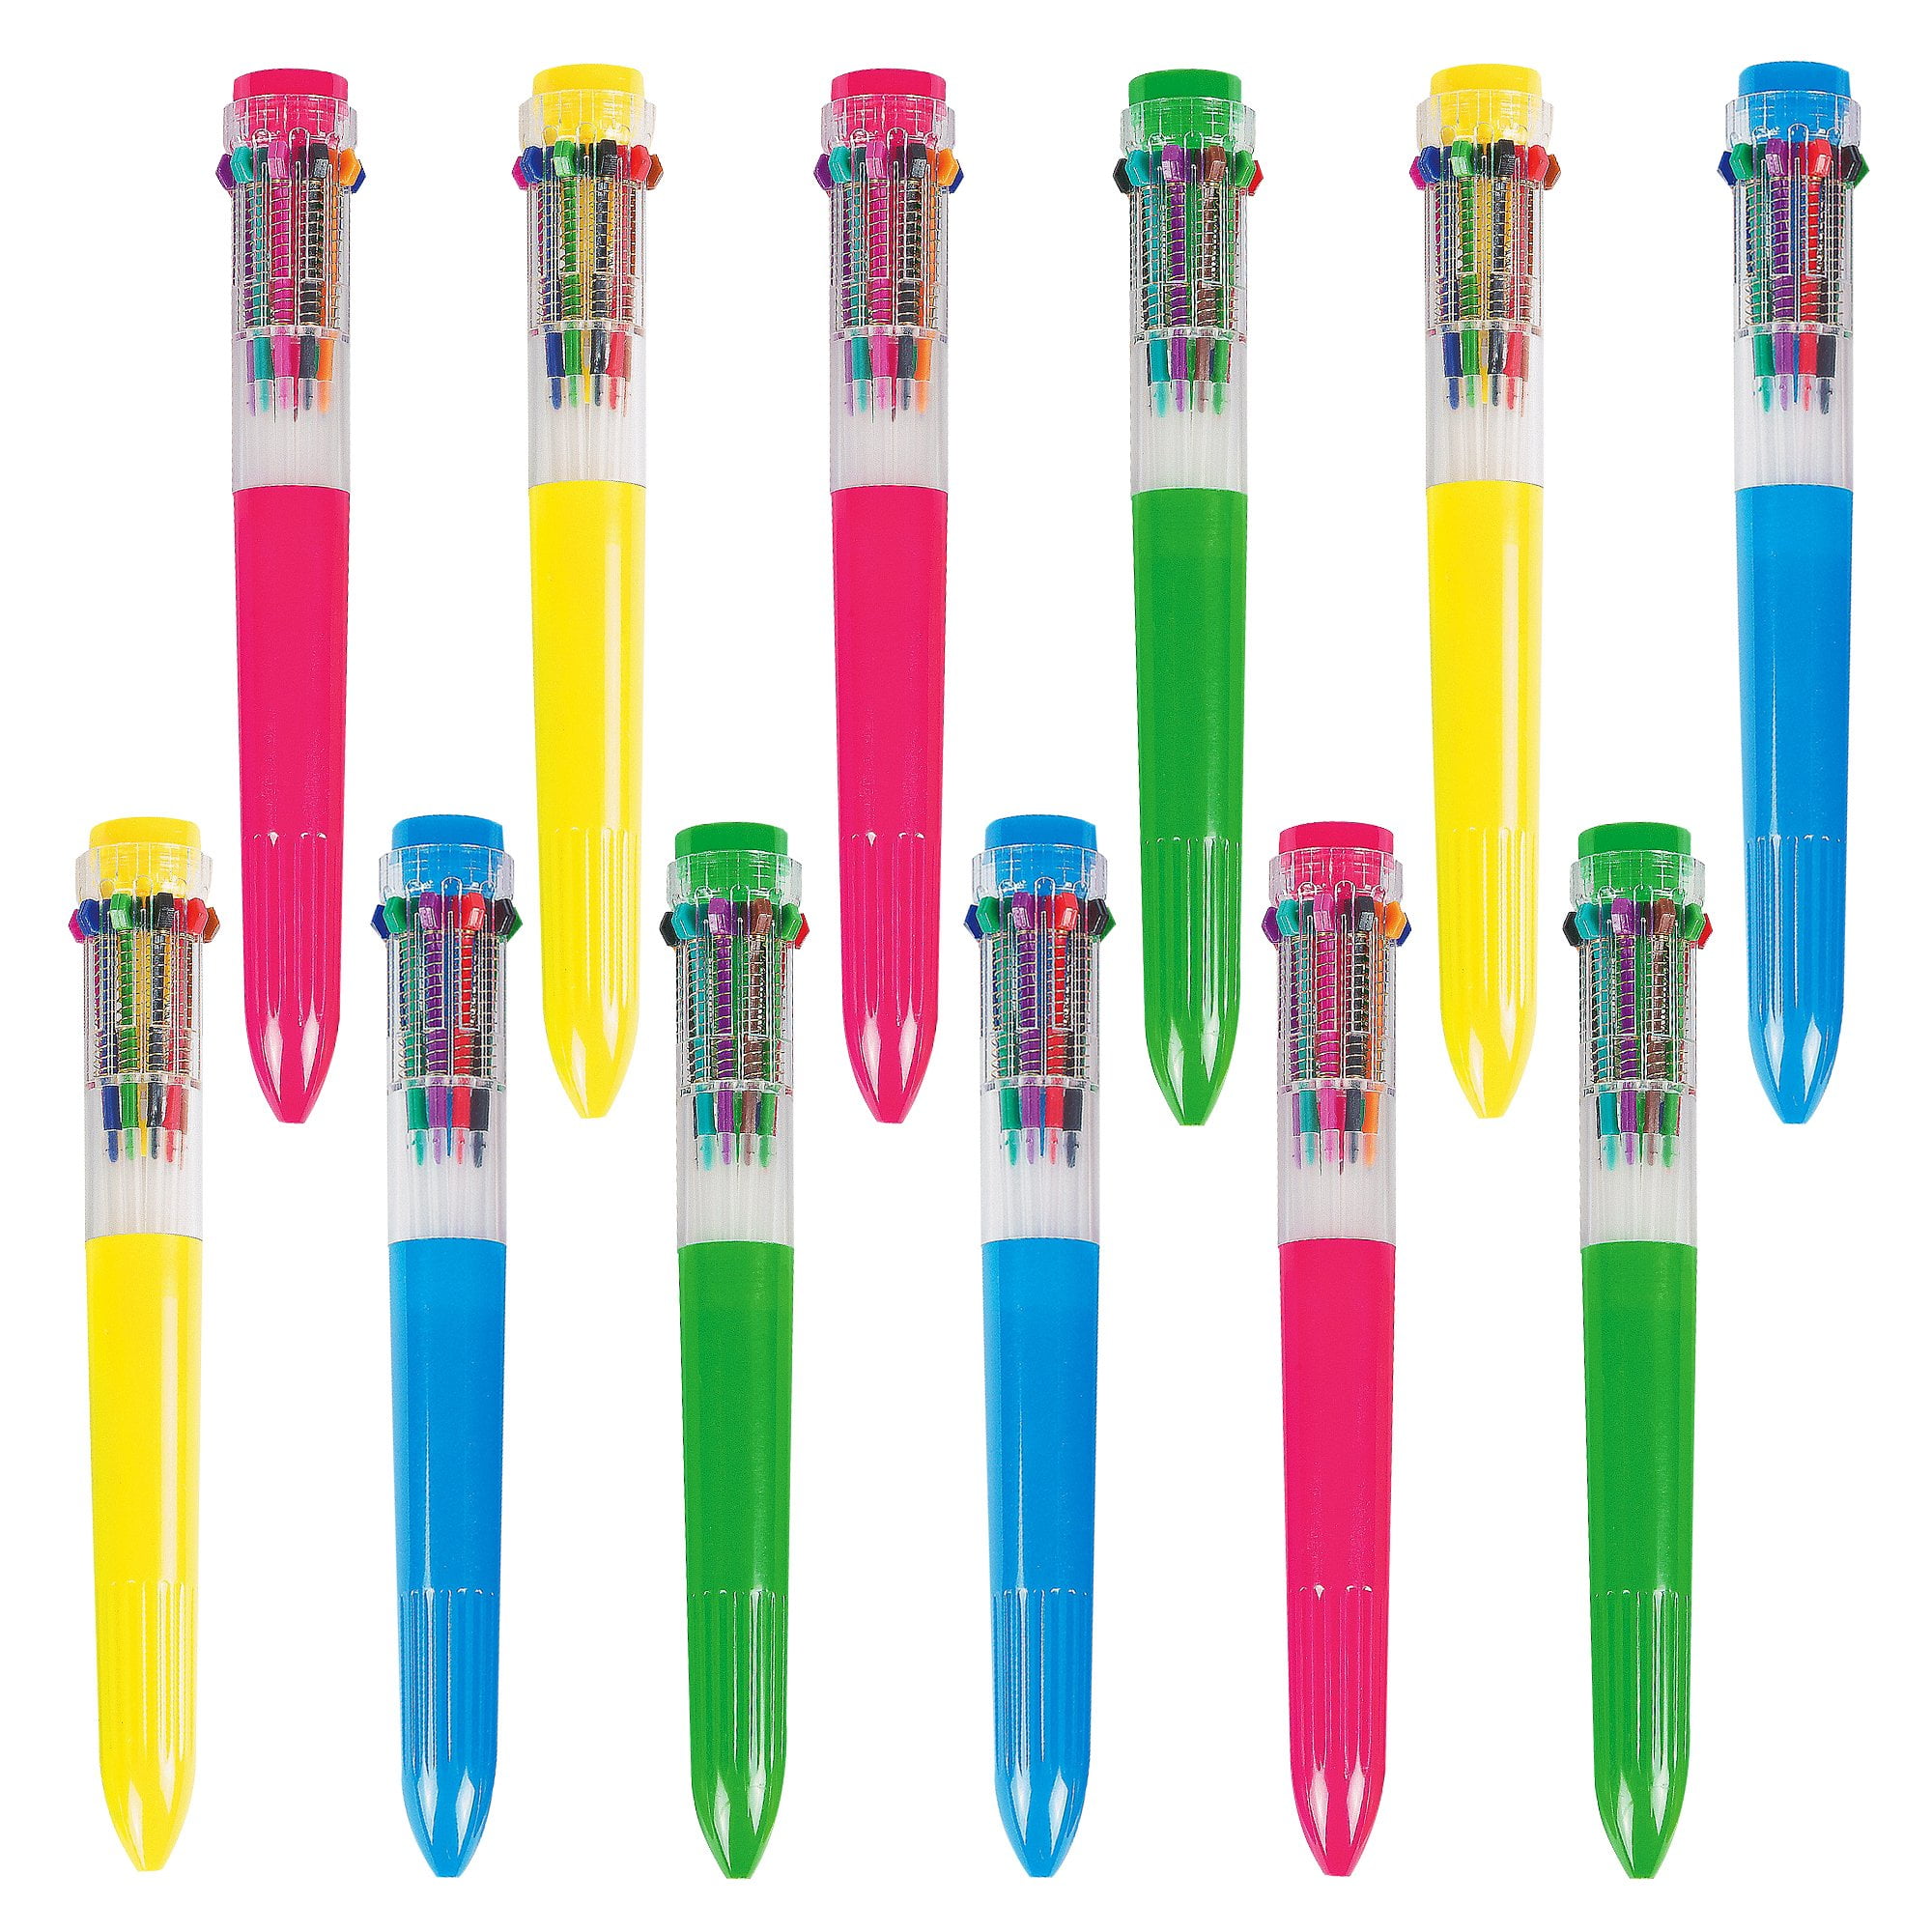  HESTYA 12 Pack Christmas 10 in 1 Mini Shuttle Pens Multicolor  Pens Colorful Plastic Neon Retractable Ballpoint Pens for Office School  Supplies Students Children Gift : Office Products